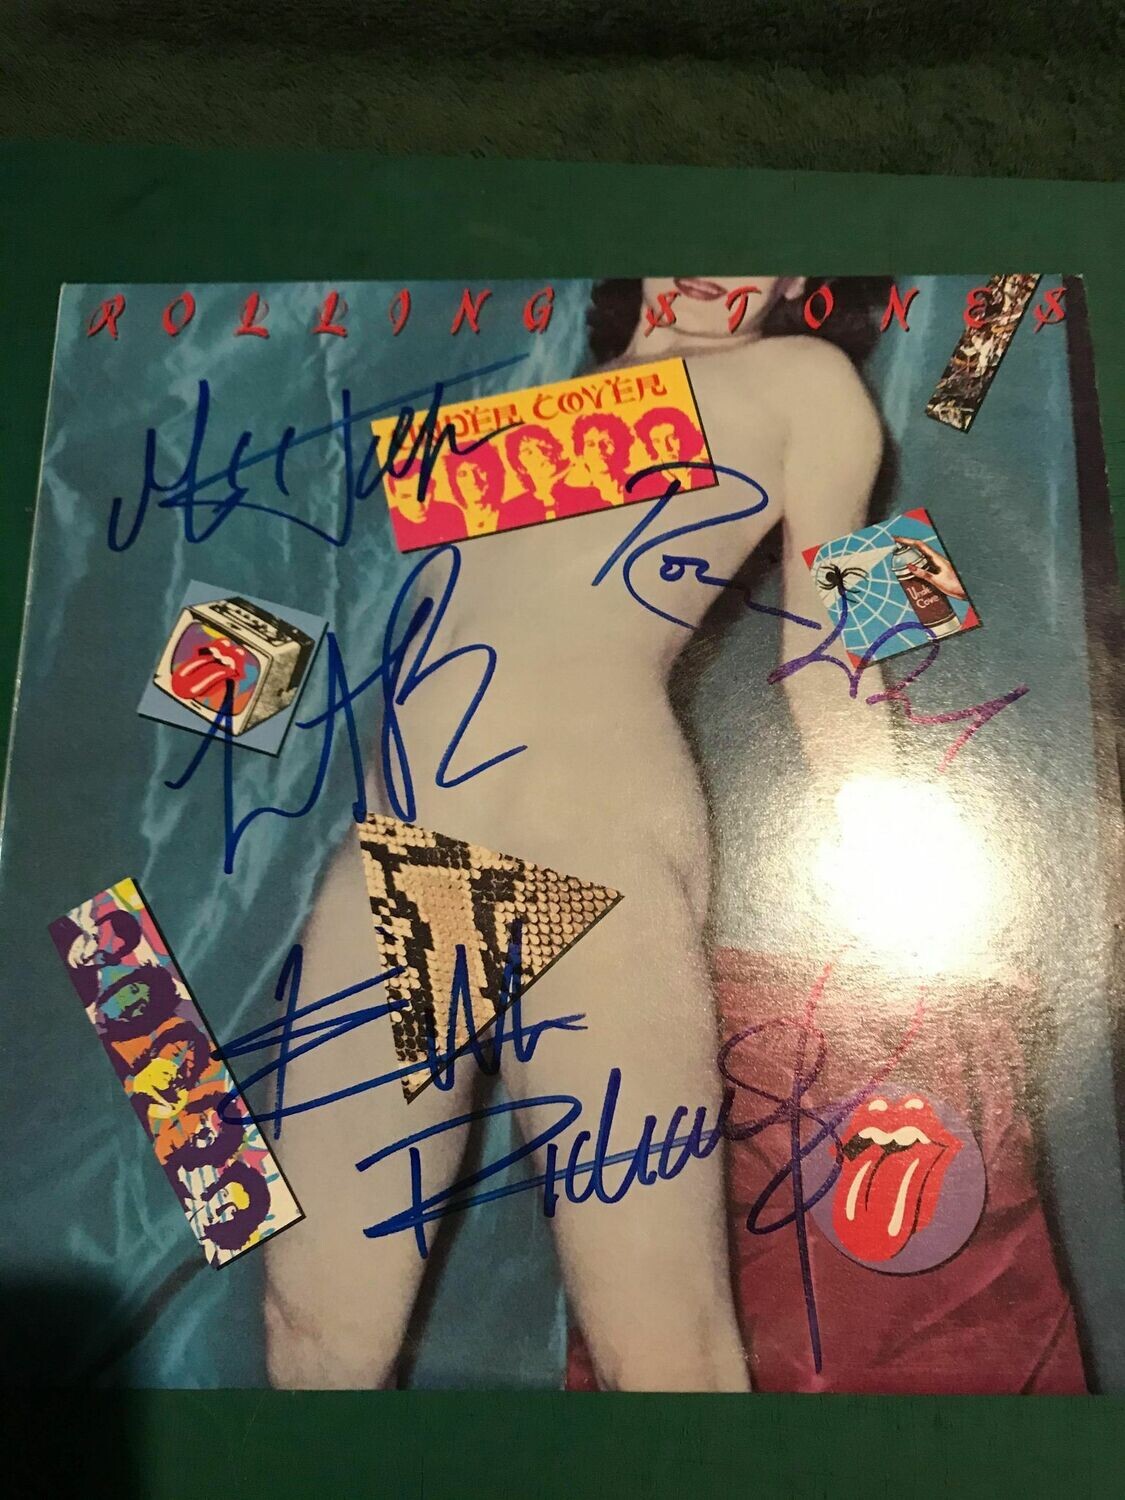 Rolling Stones signed record Autografi Rolling Stones Signed Record Autograph